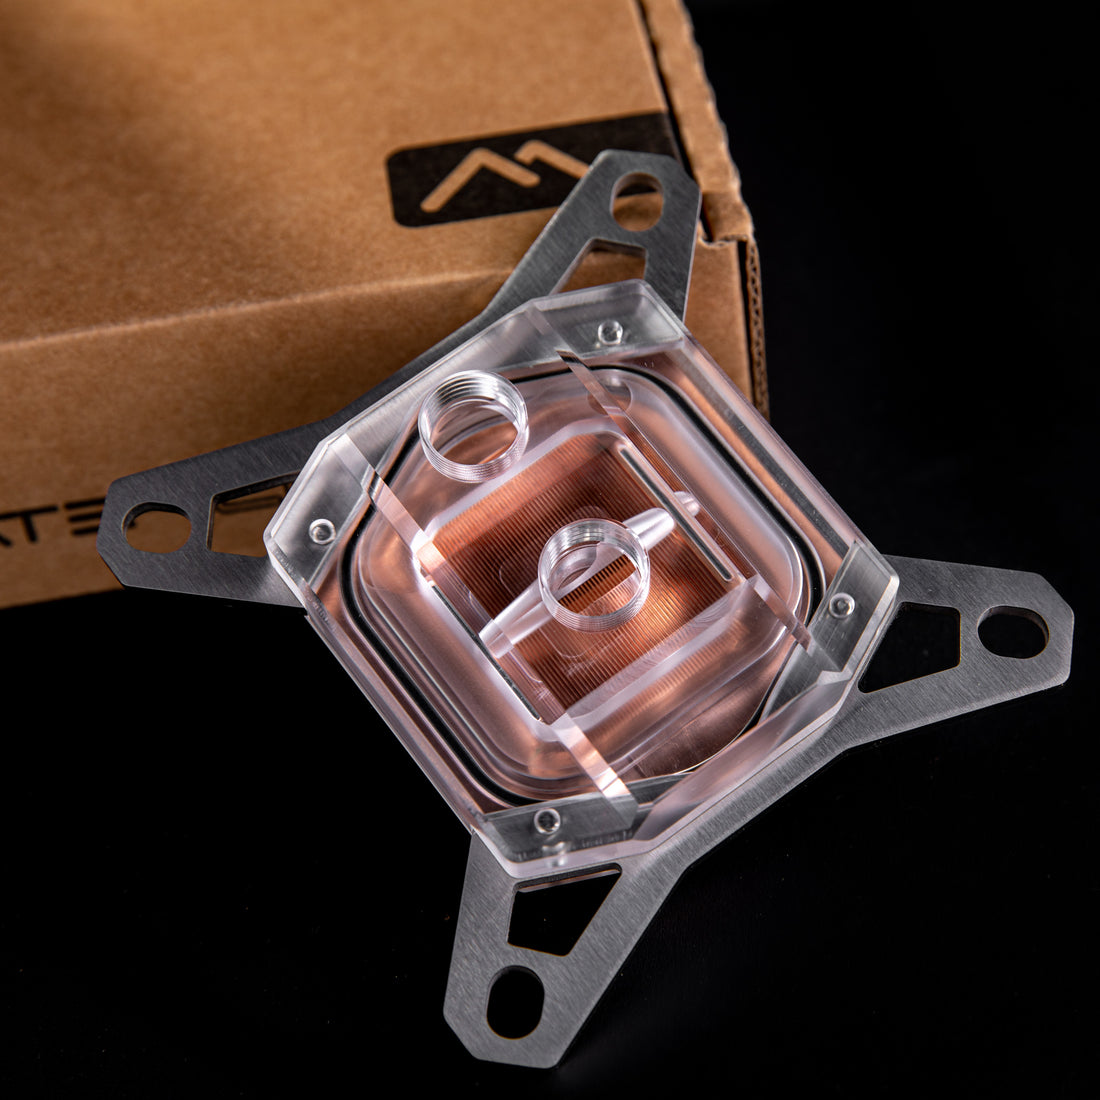 Watercool Heatkiller IV water blocks now available! Ordinary Cooling Gear